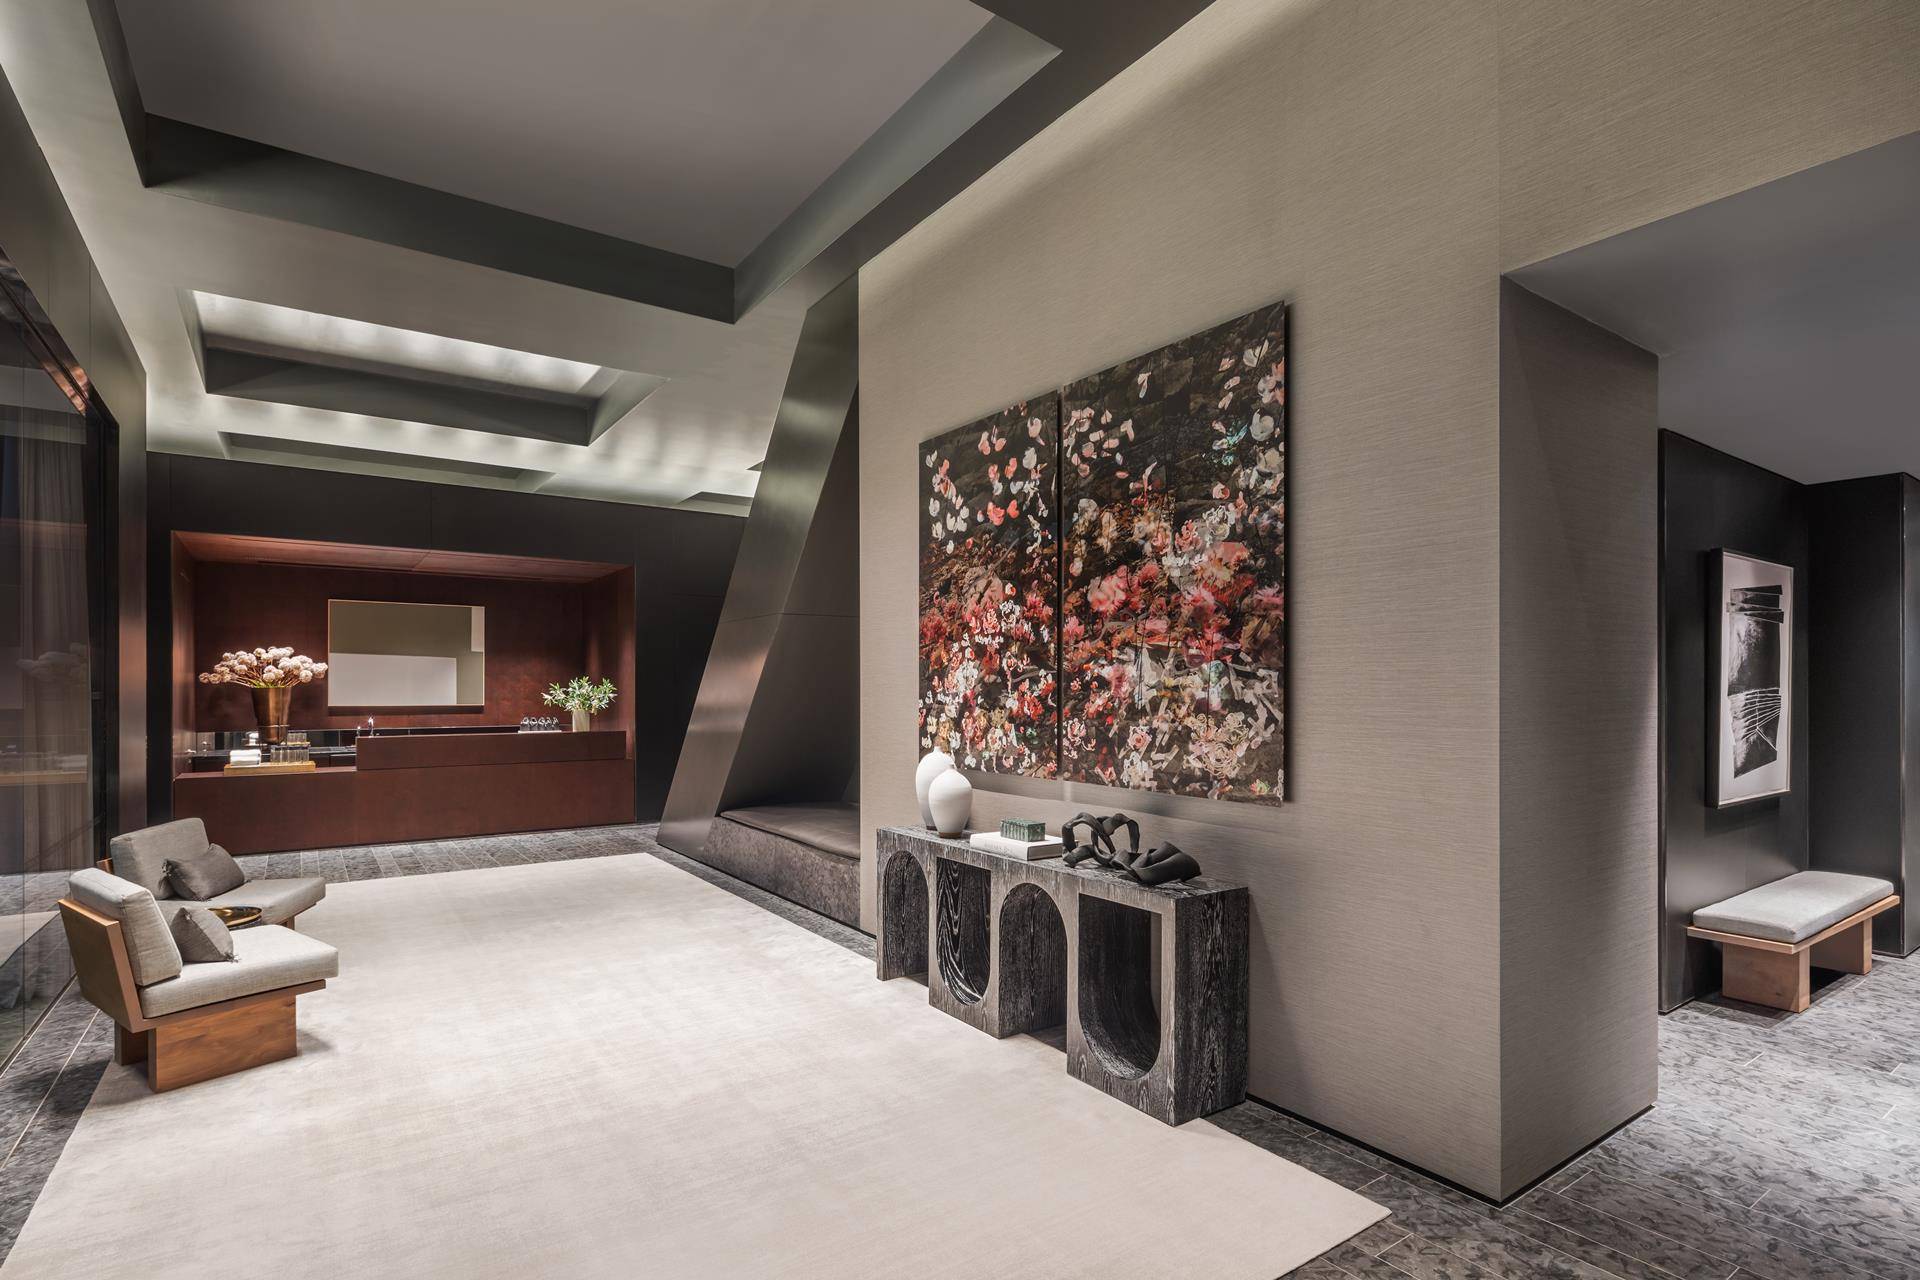 Balancing grand scale living with the intimate feeling of home, Residence 34A at 53 West 53 comprises 3, 112 square feet, offering three bedrooms, three and a half bathrooms, and ...